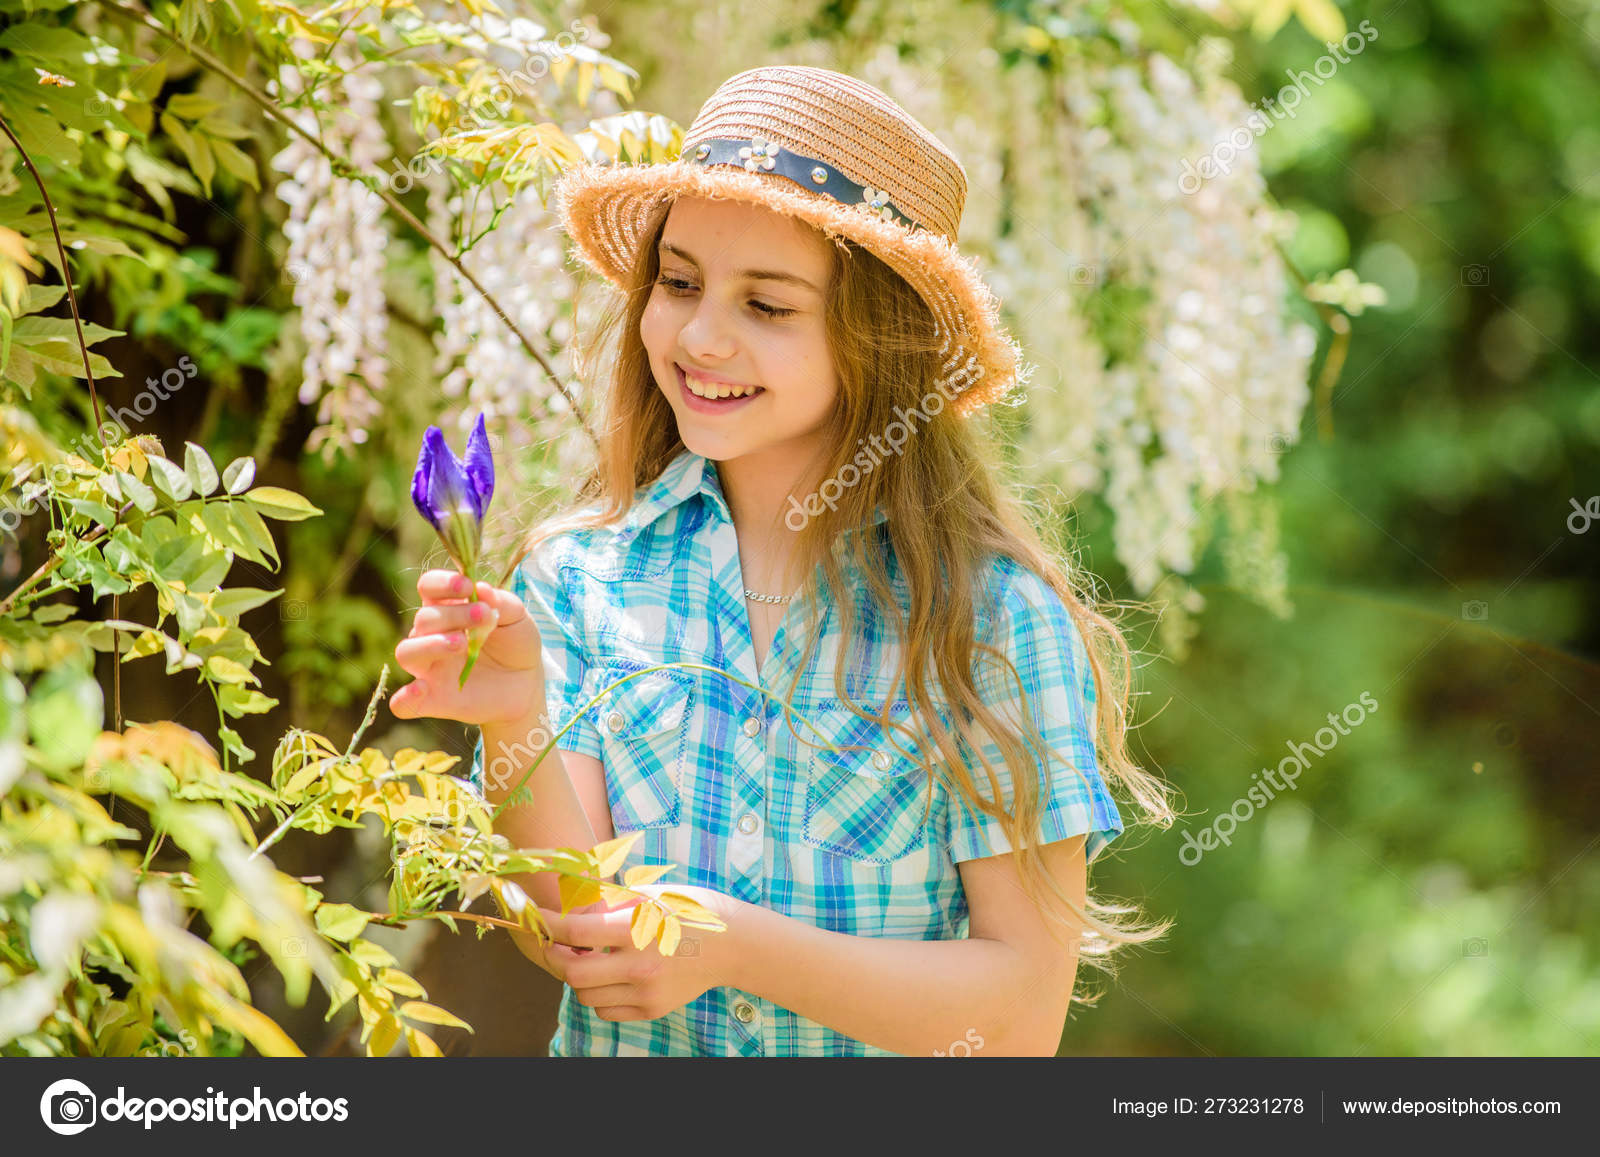 Florist. Spring holiday. Womens day. Natural beauty. Childhood happiness. happy child hold iris flower. summer vacation. Green environment. little girl and iris flower. Living in the moment